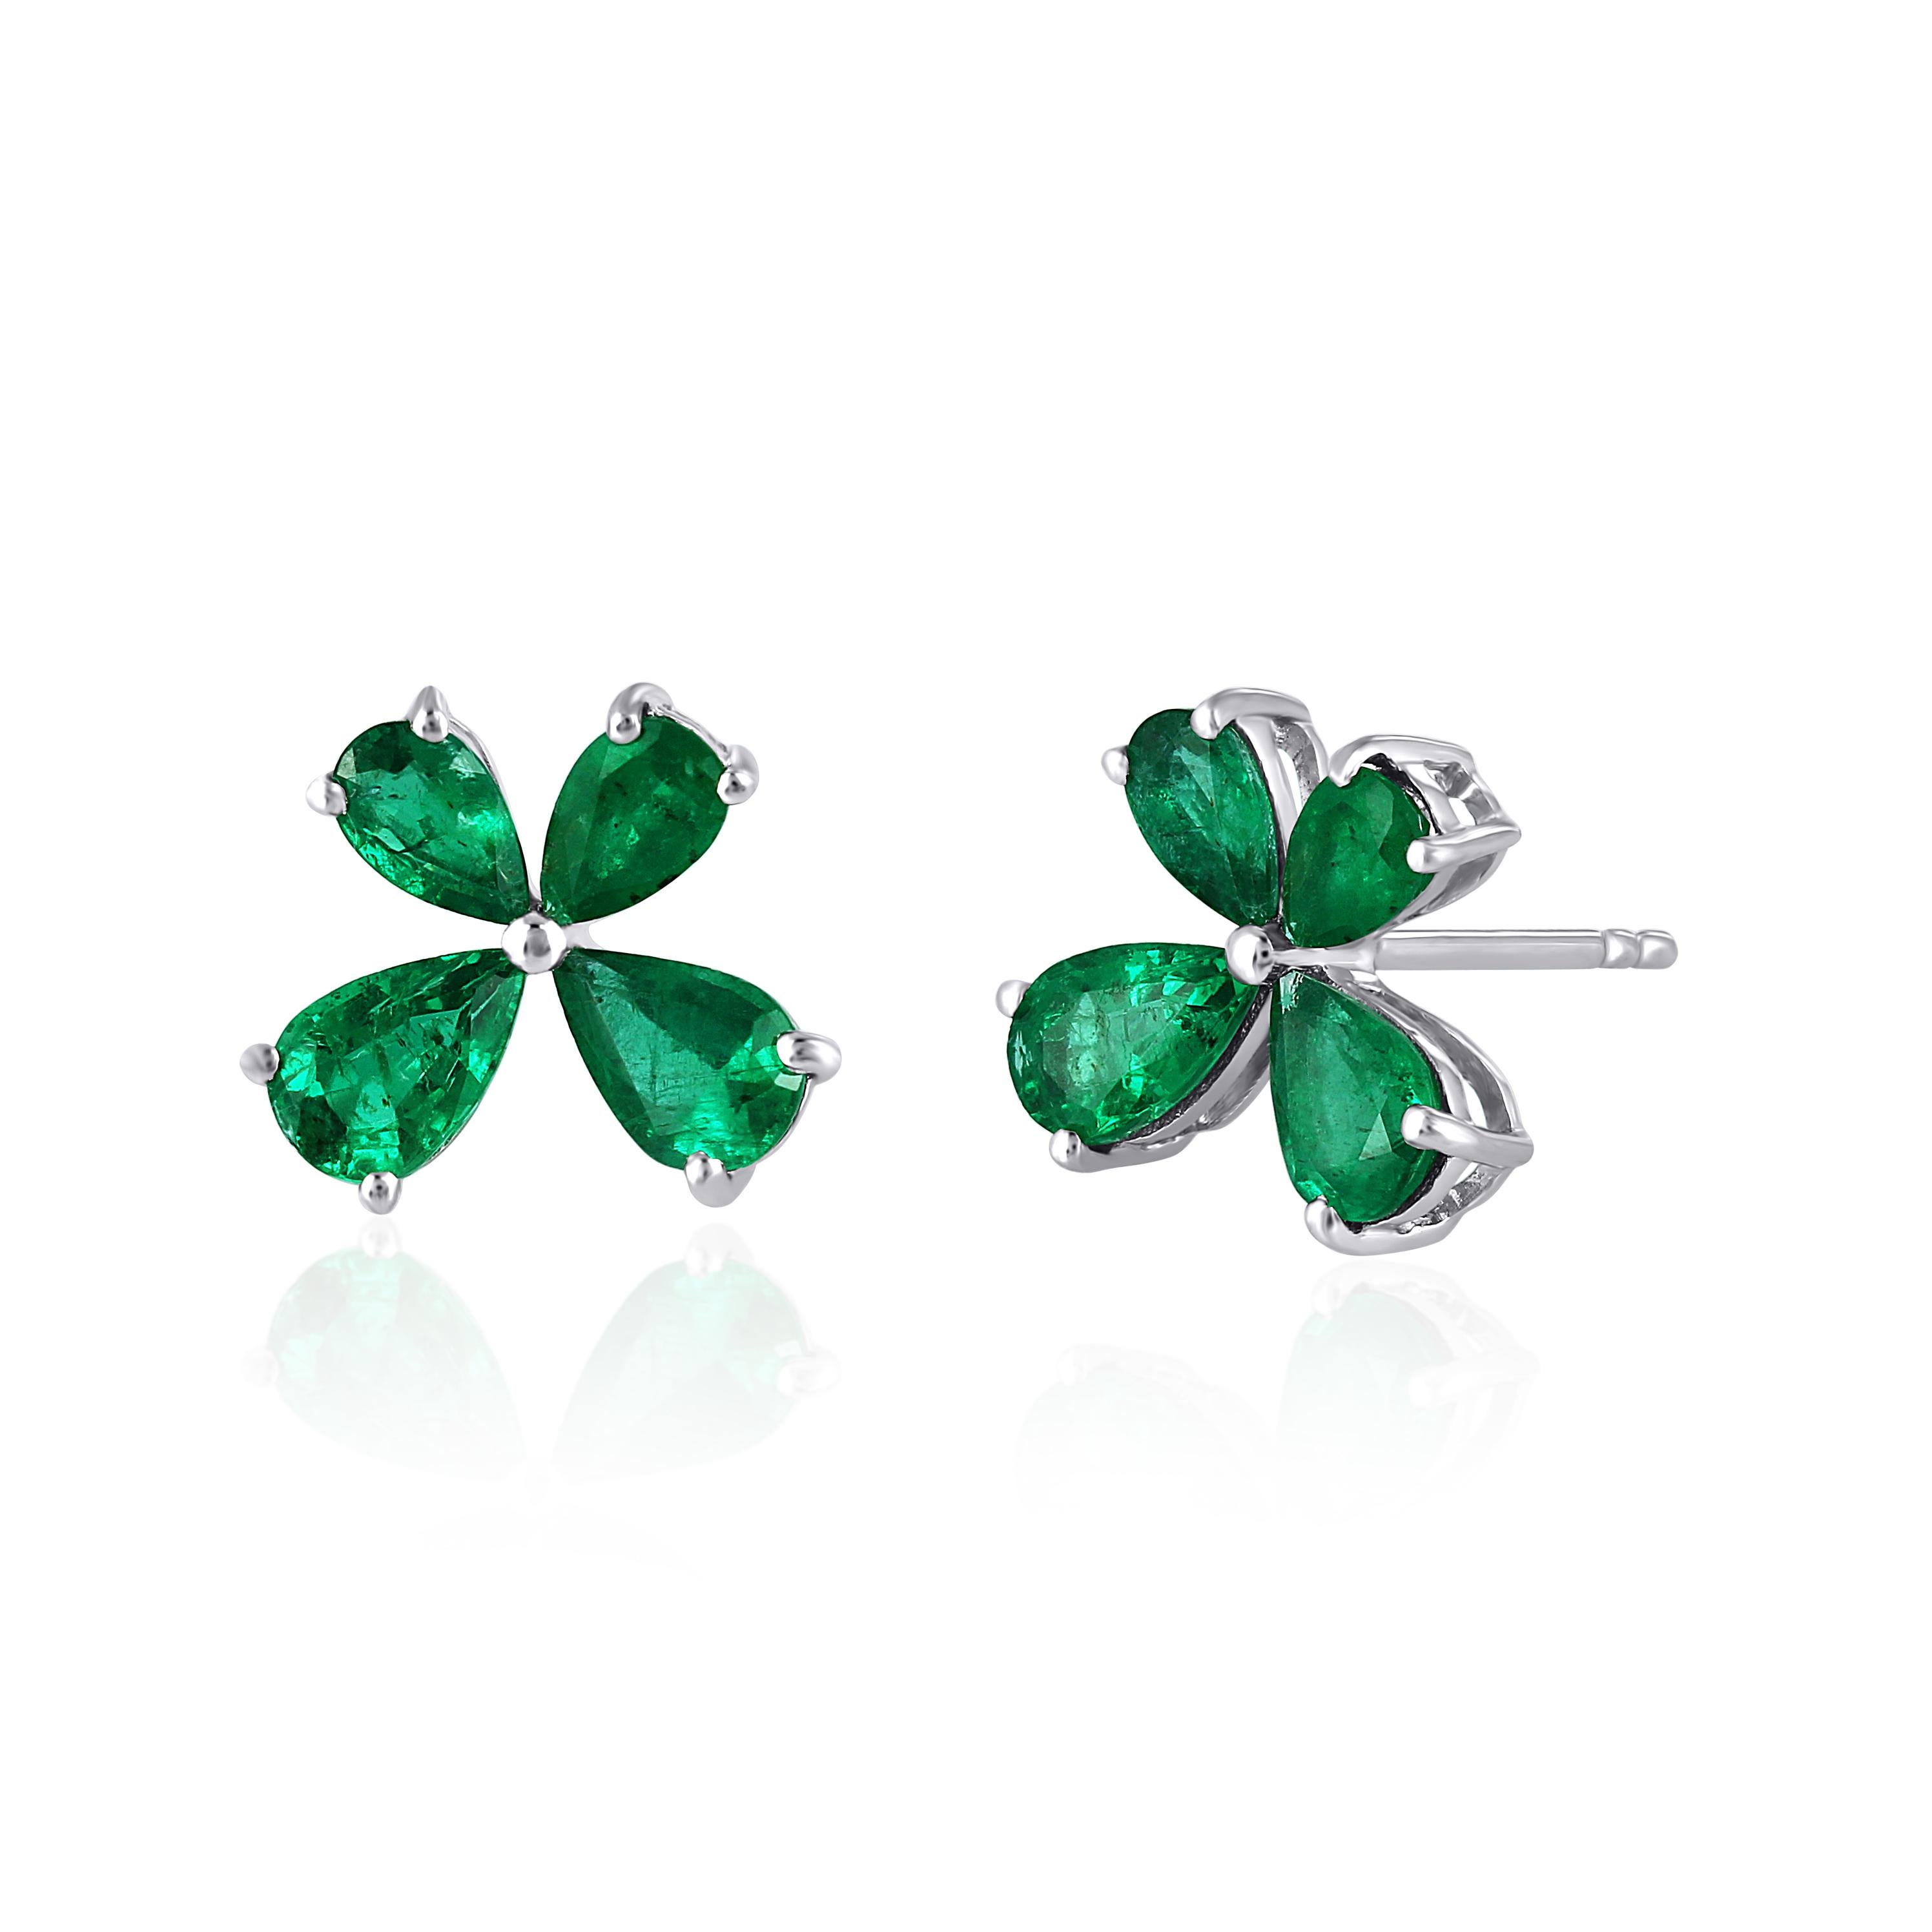 These Gemistry floral stud earrings have designs influenced by nature! Green emeralds weighing 2.16 carats total weight are set in polished 18k white gold as petals of our growing flower stud earrings. These contemporary stud earrings make the ideal